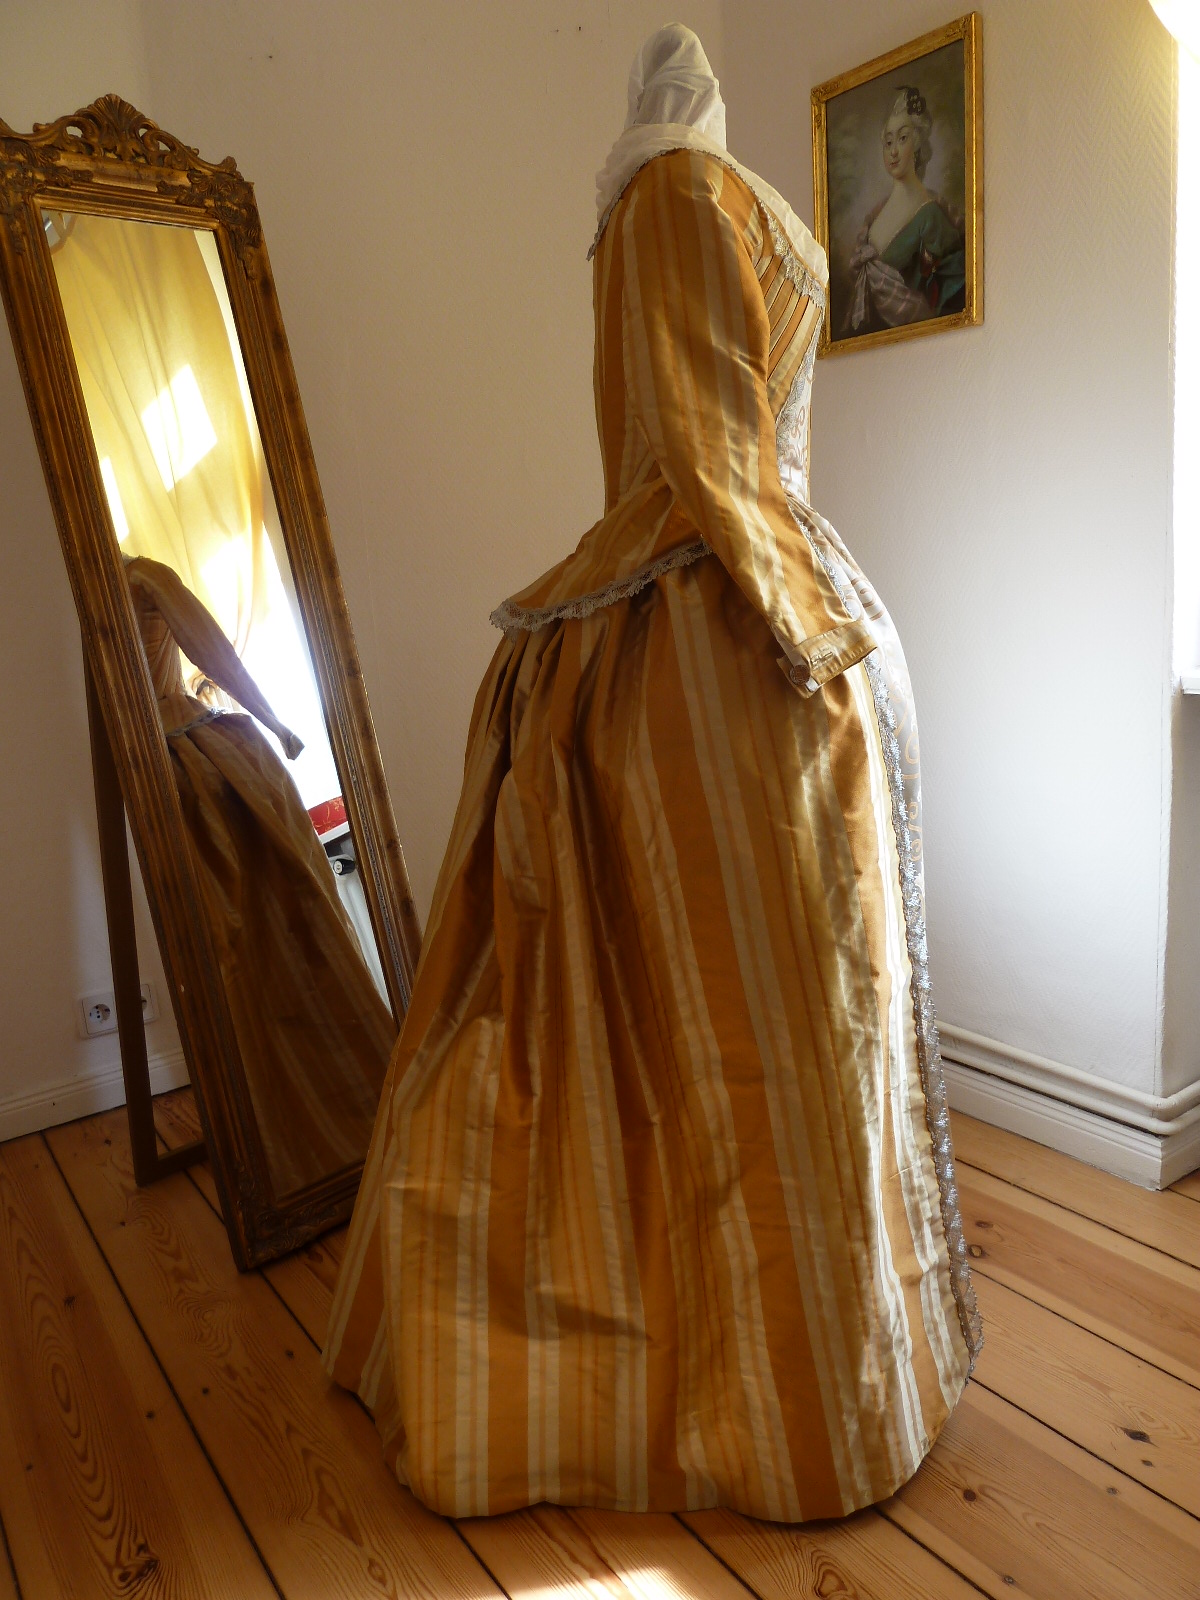 Robe a l'anglaise of ca. 1780 - full view